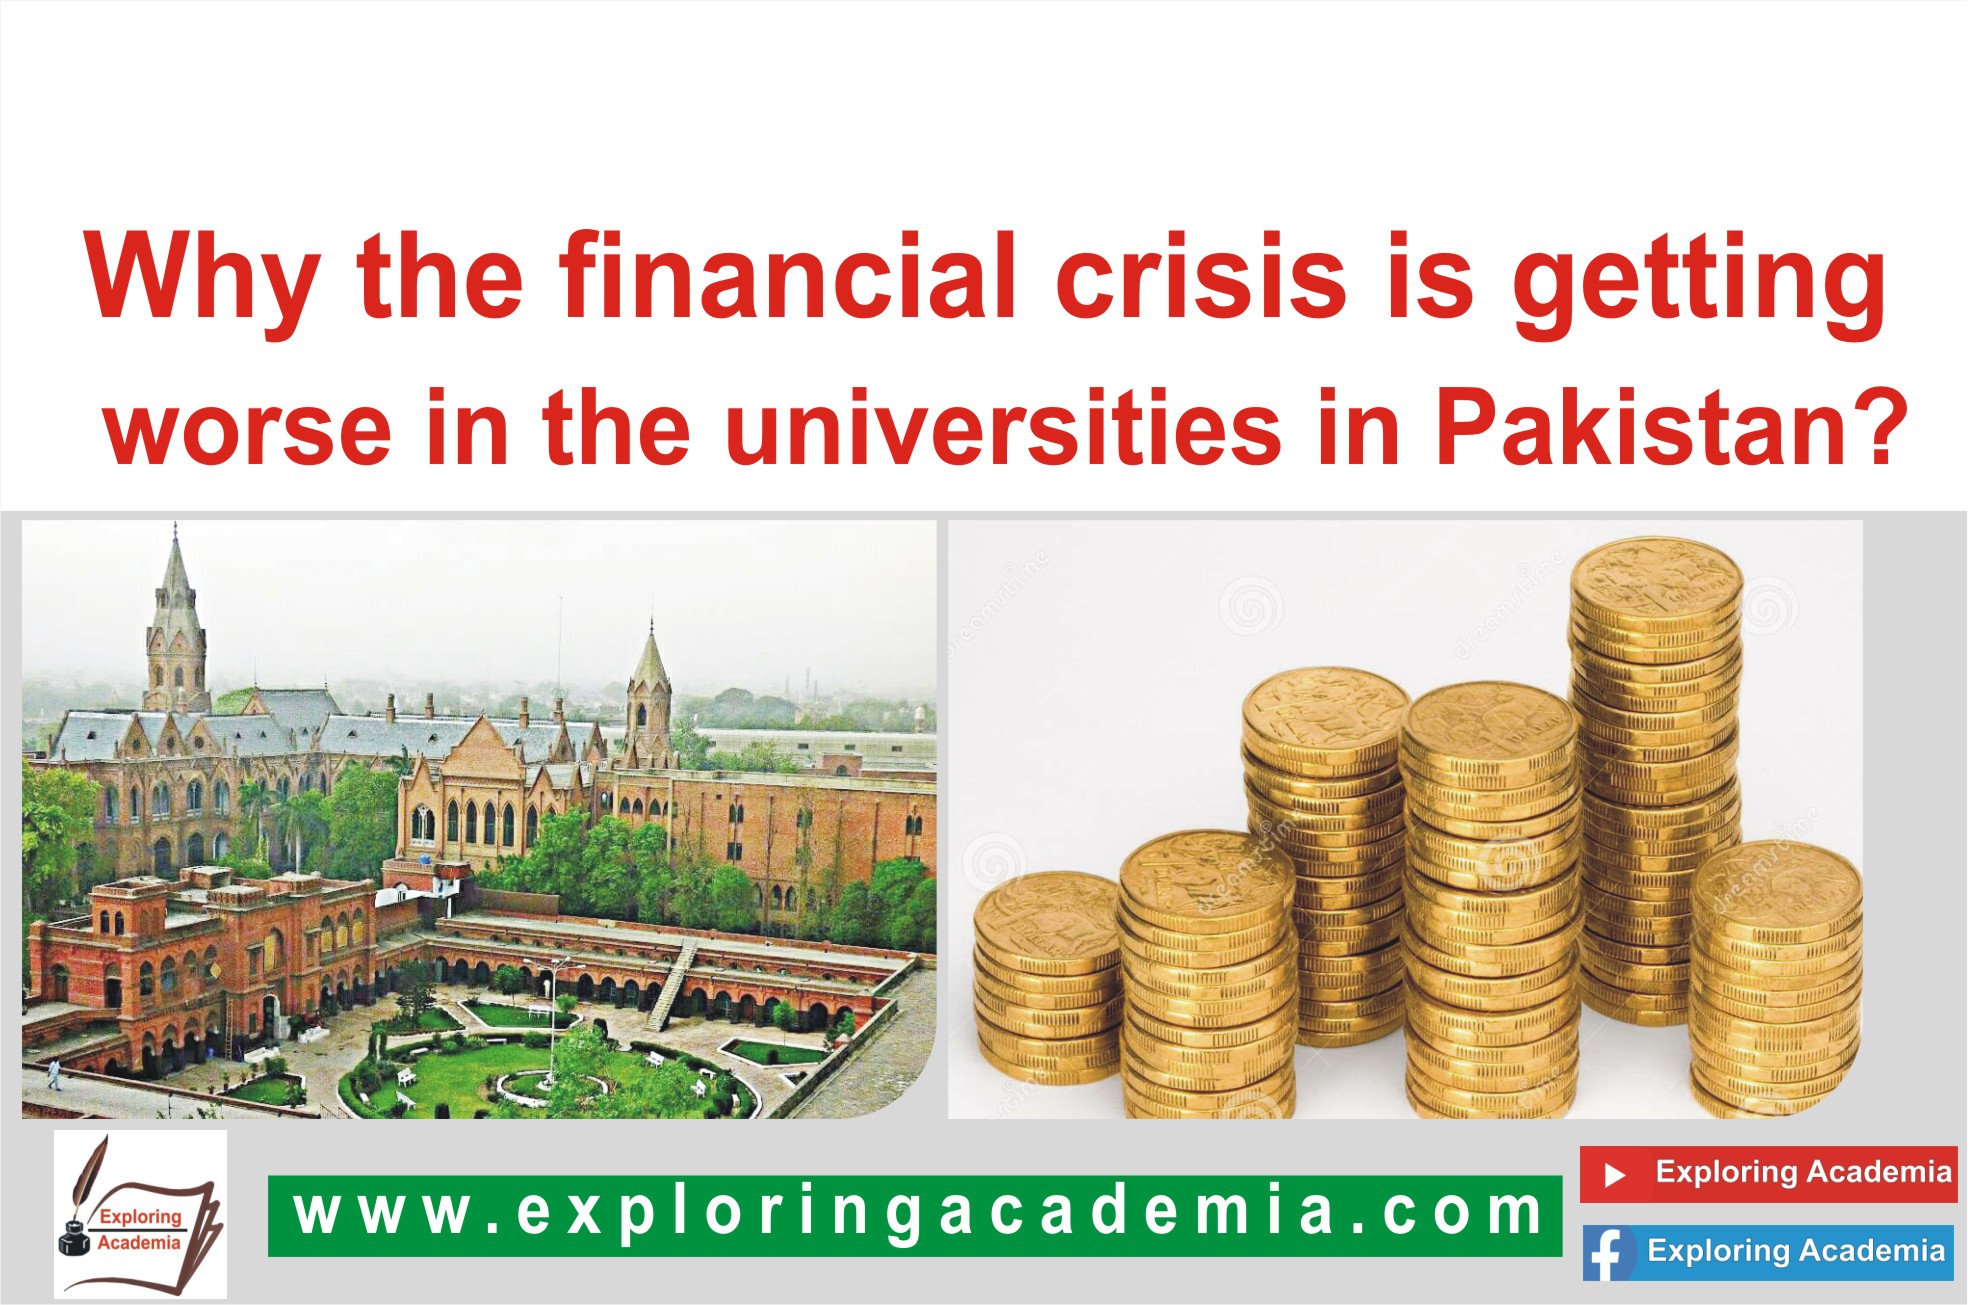 Why the financial crisis is getting worse in the universities in Pakistan?